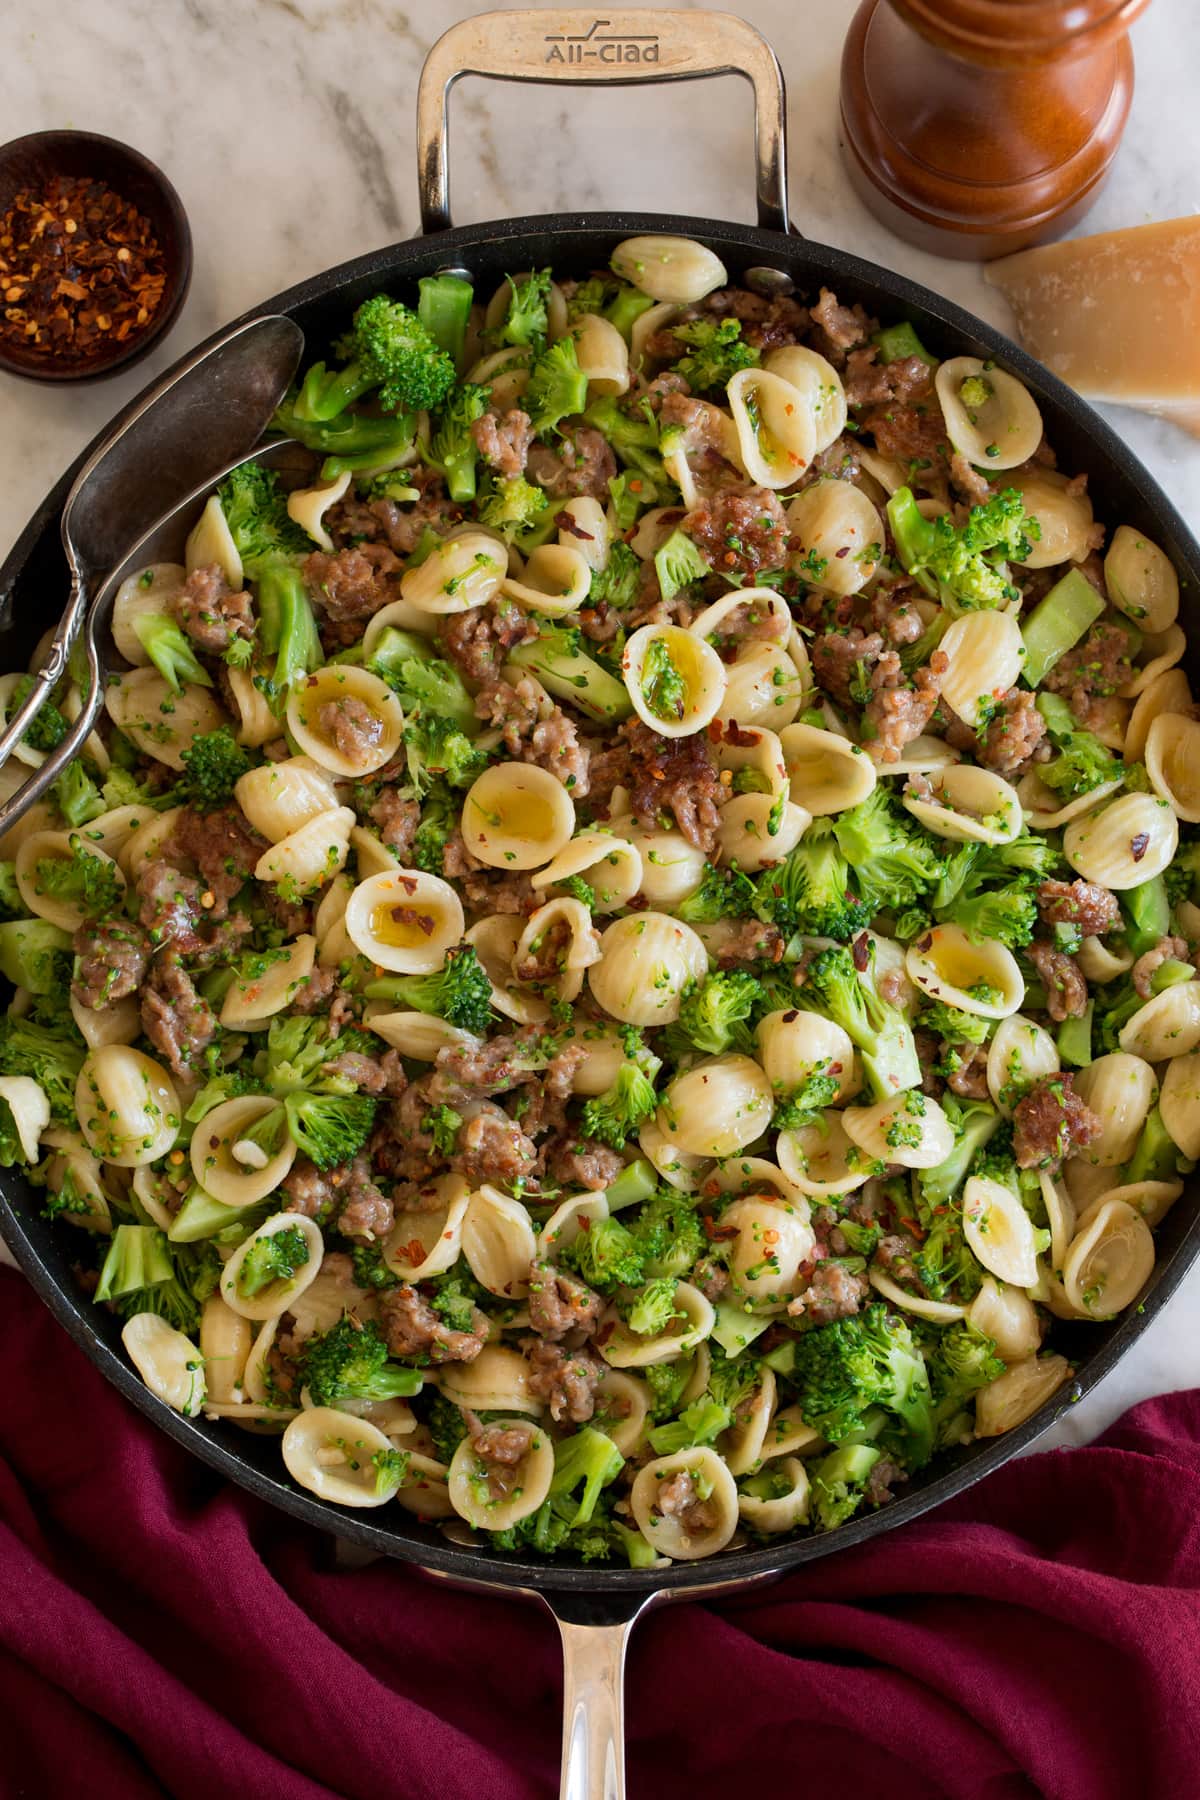 Photo: Orecchiette with sausage and broccoli shown in a black skillet from above.